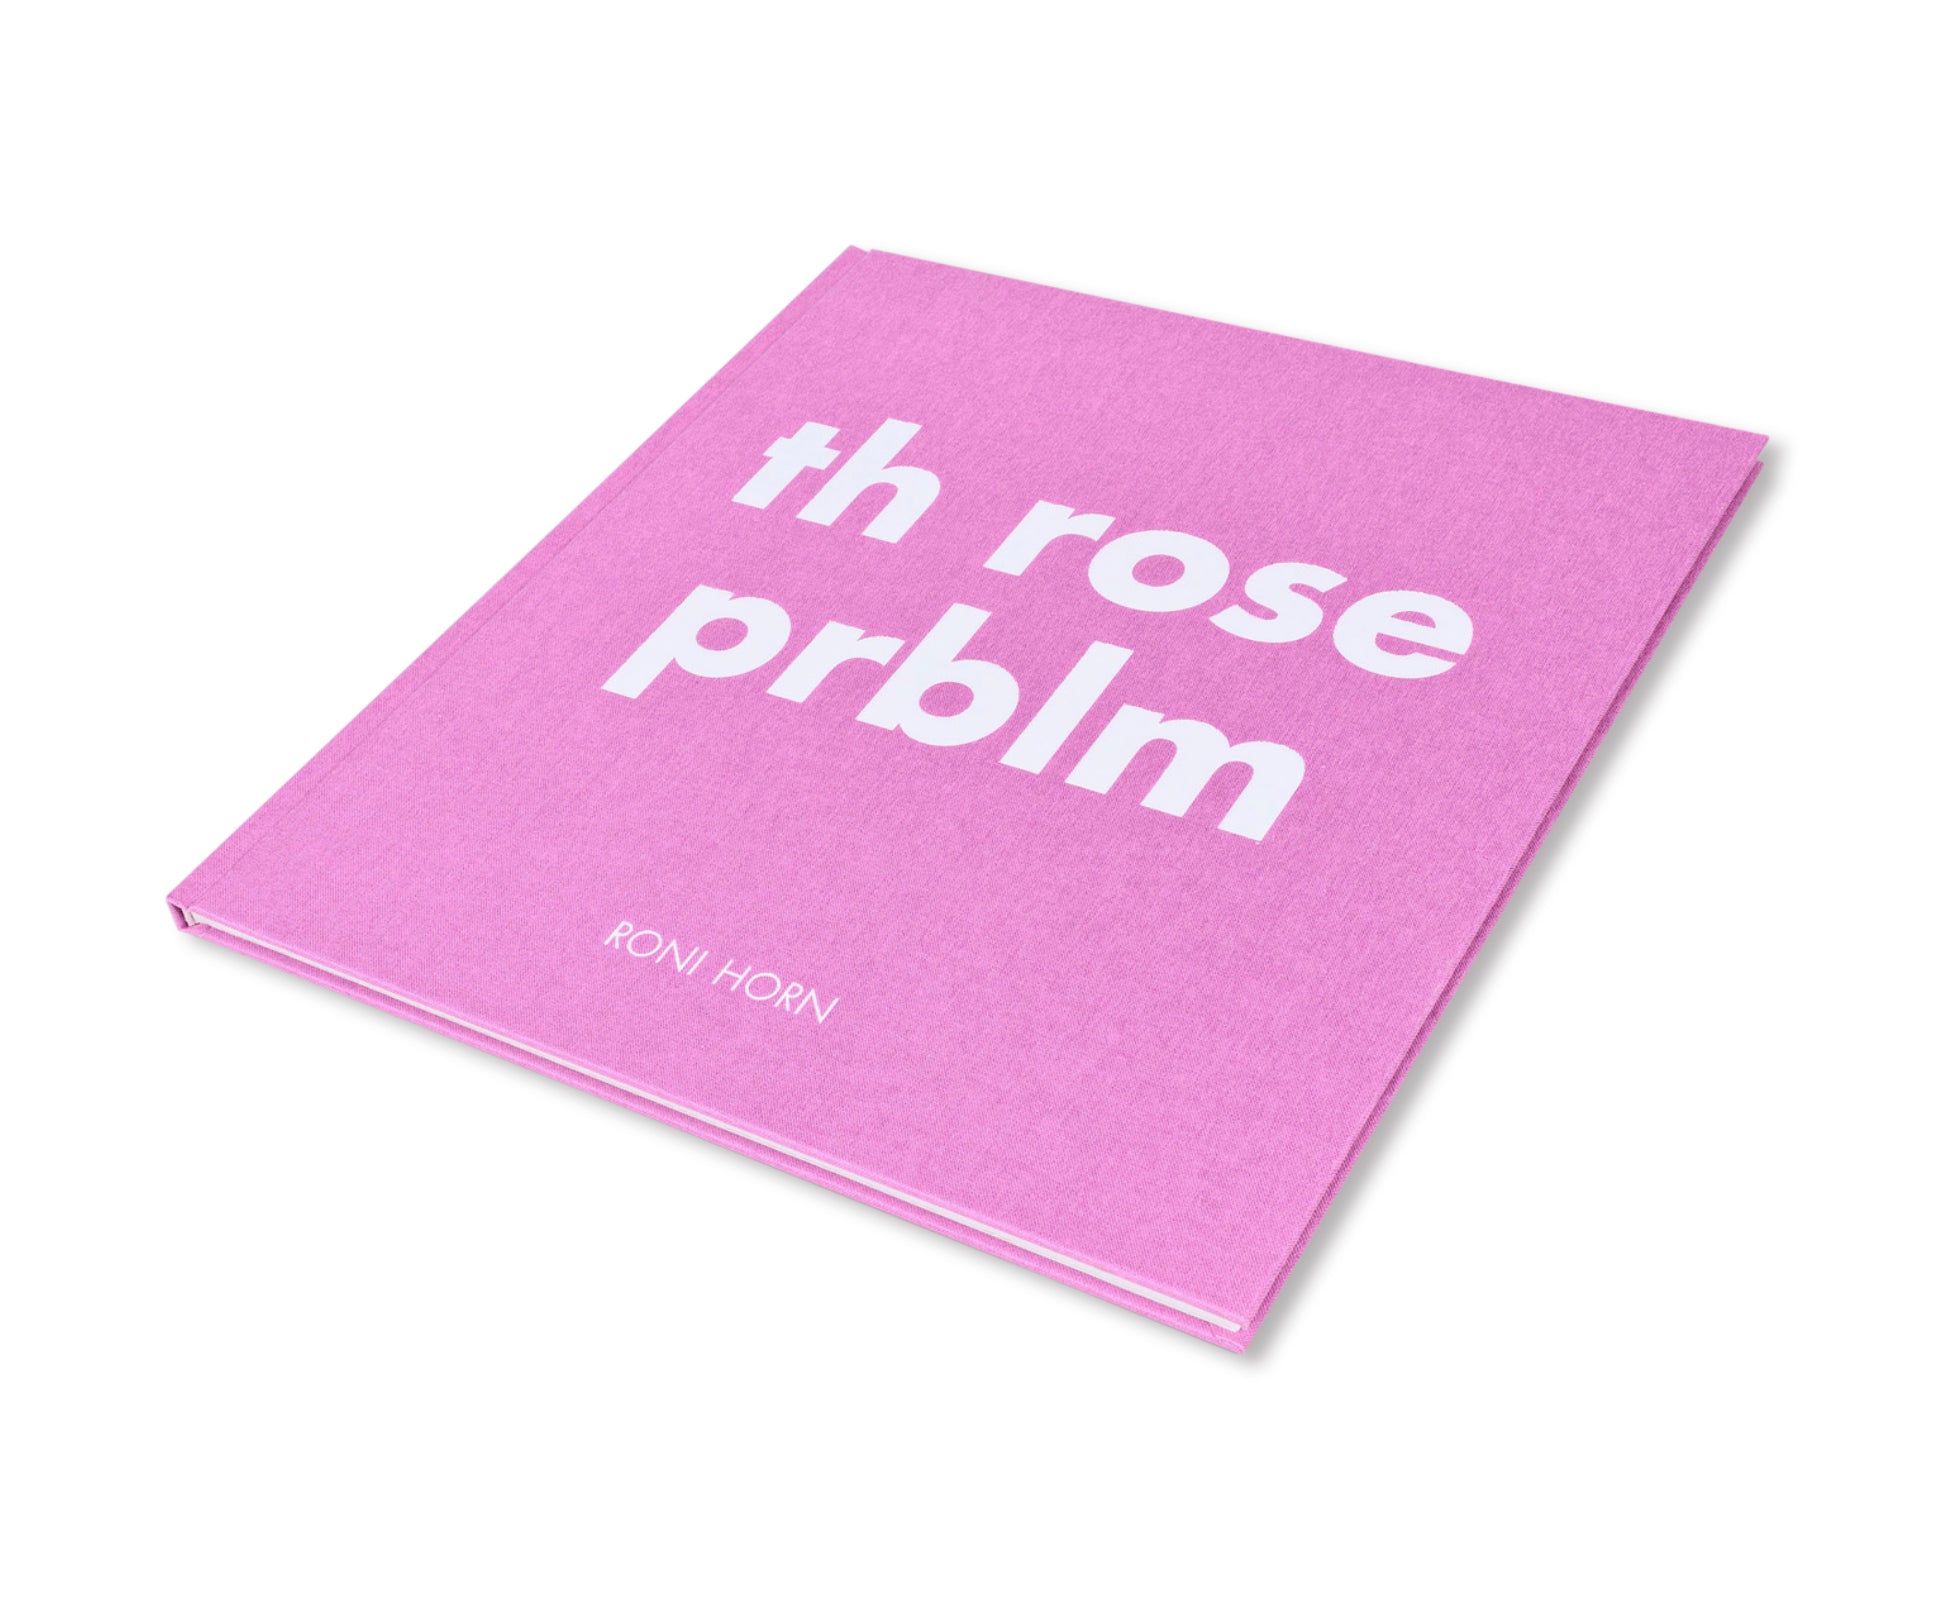 TH ROSE PRBLM by Roni Horn